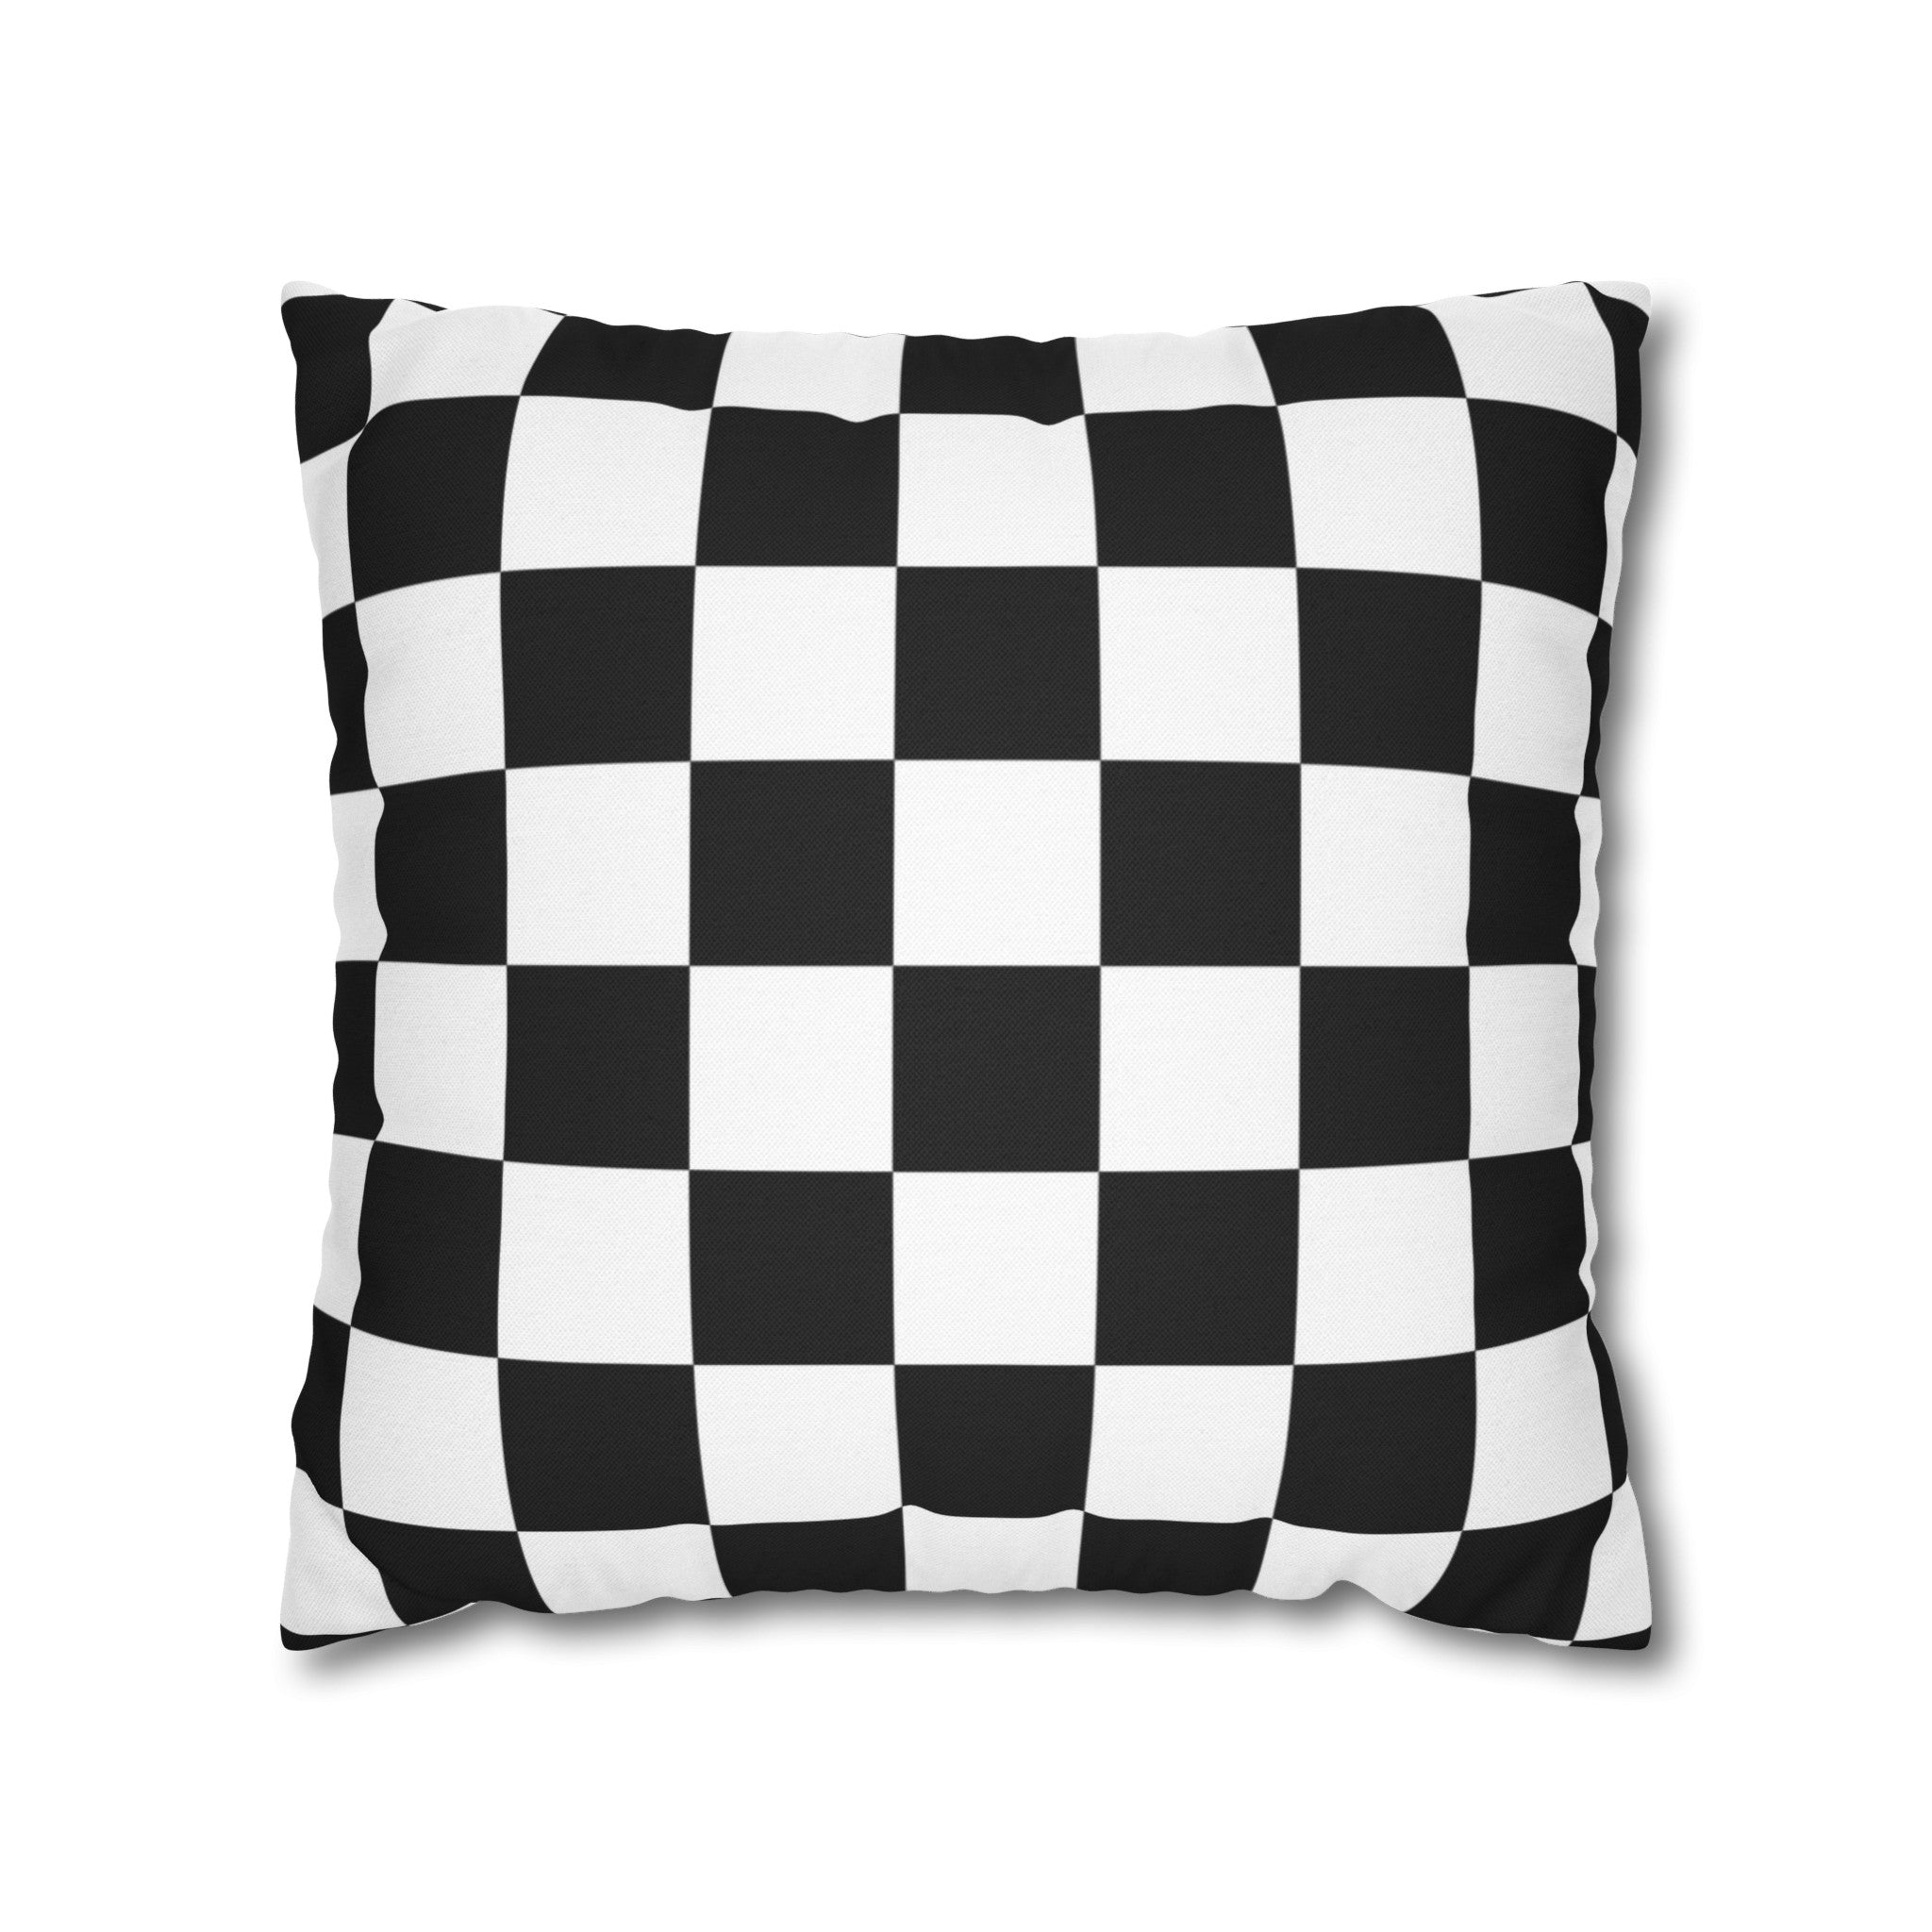 Checker Board Pattern Square Pillow Case - Black and White Spun Polyester Square Pillow - Home Décor - Couch Pillows - Modern Pattern